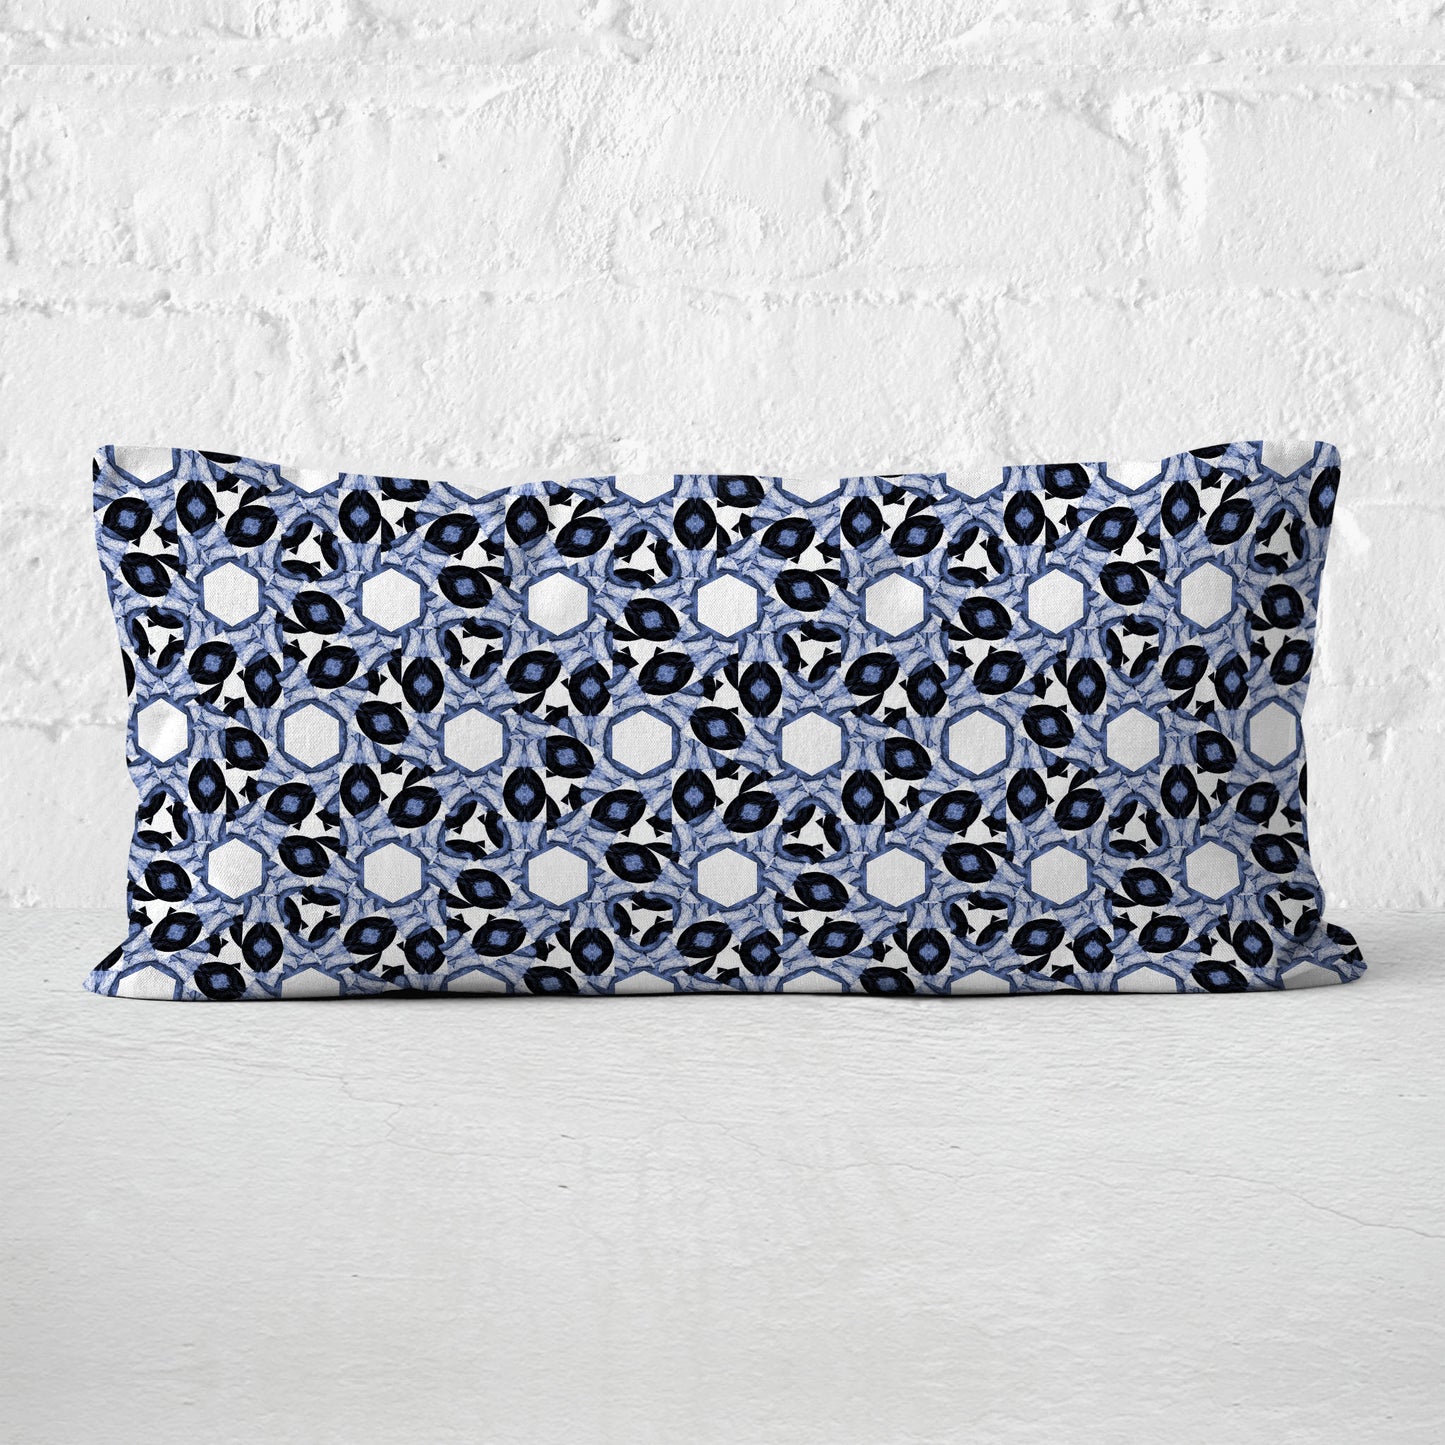 Rectangular lumbar pillow featuring abstract geometric pattern in blue and white leaning against a white brick wall.